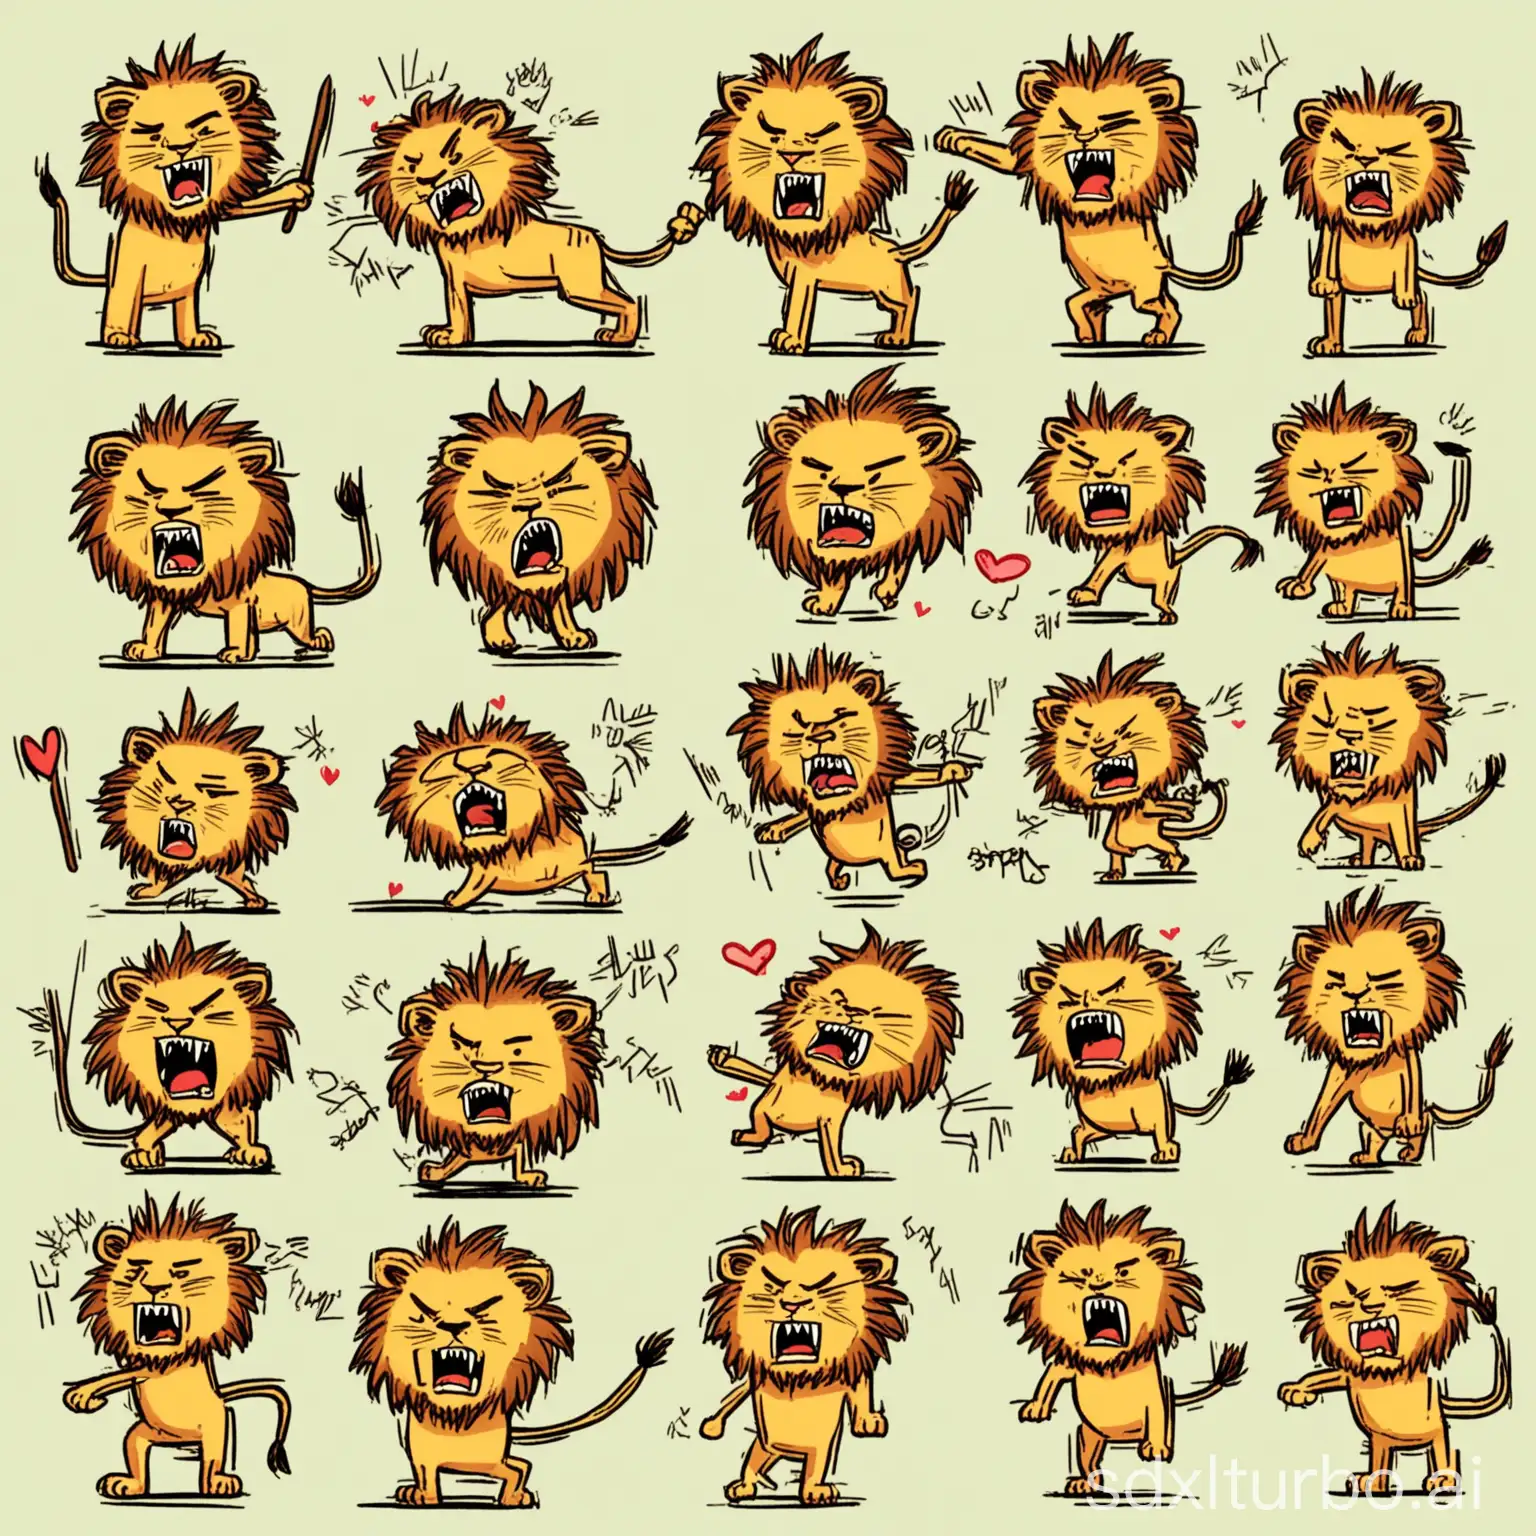 Dynamic-Lion-Expressions-Cute-Stick-Figure-Style-on-White-Background